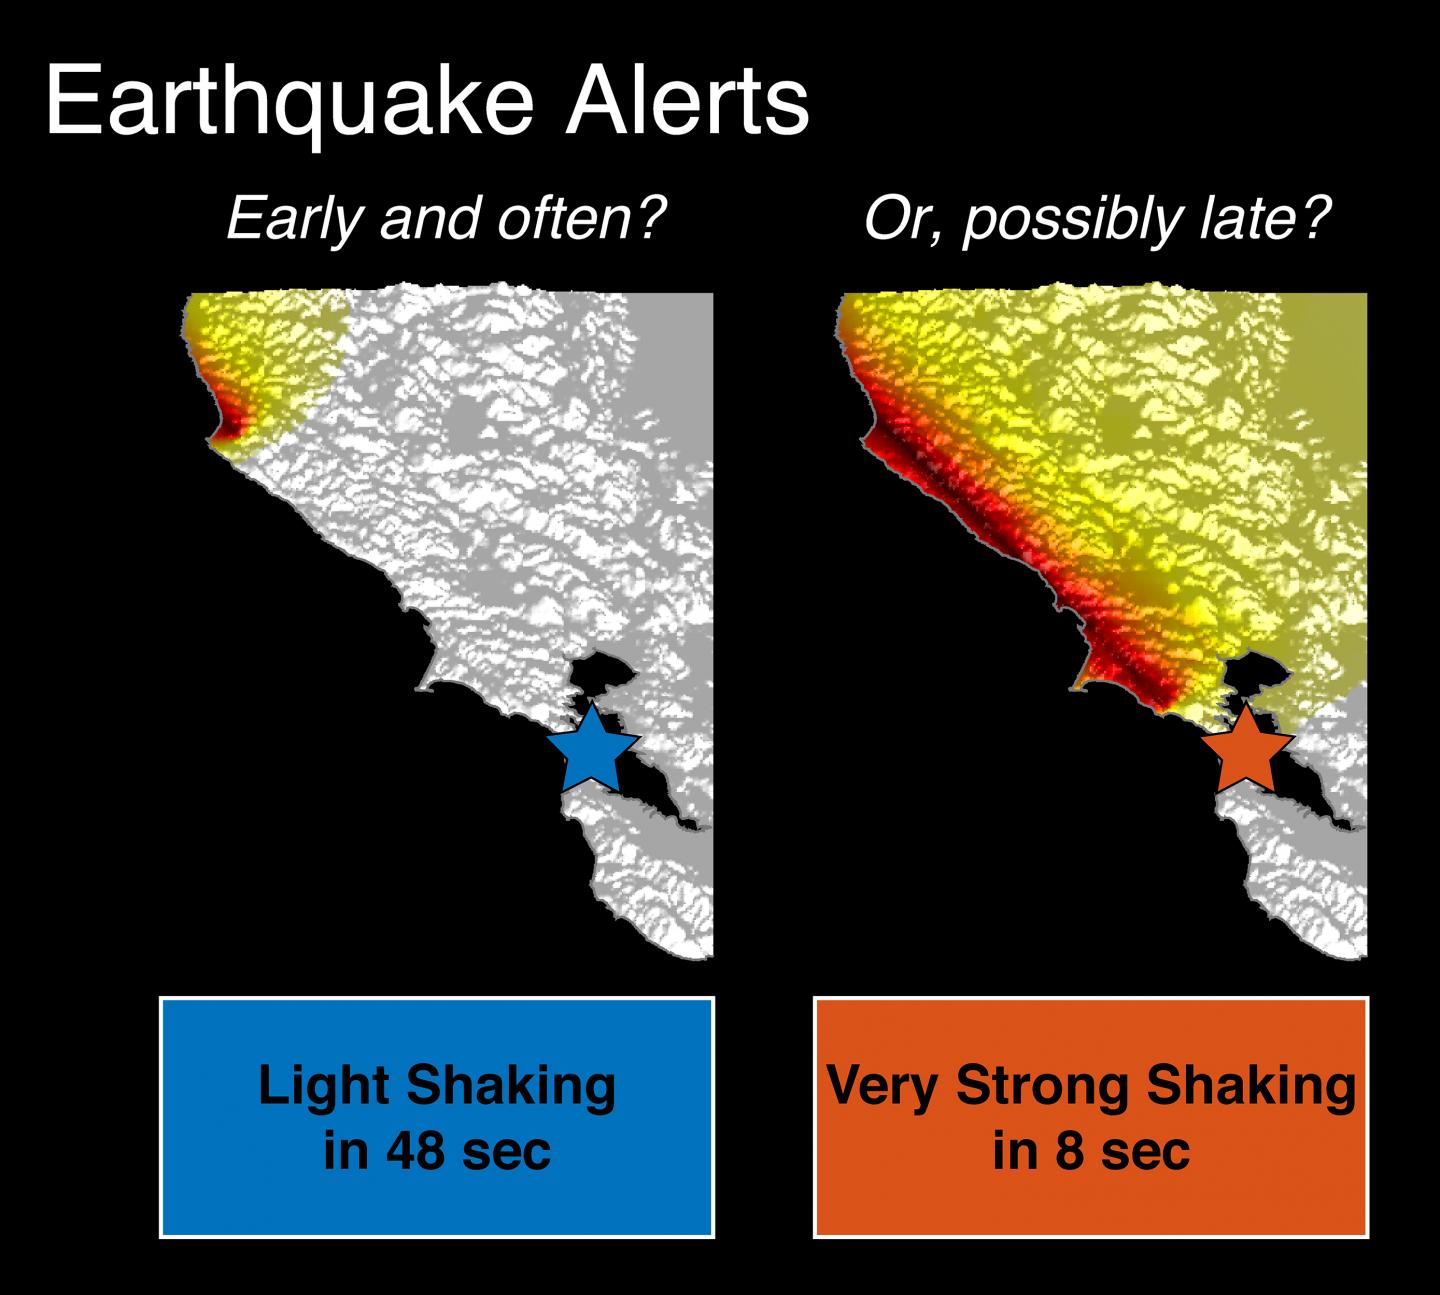 Are Earthquake Early Warning Systems Useful? (1 of 3)